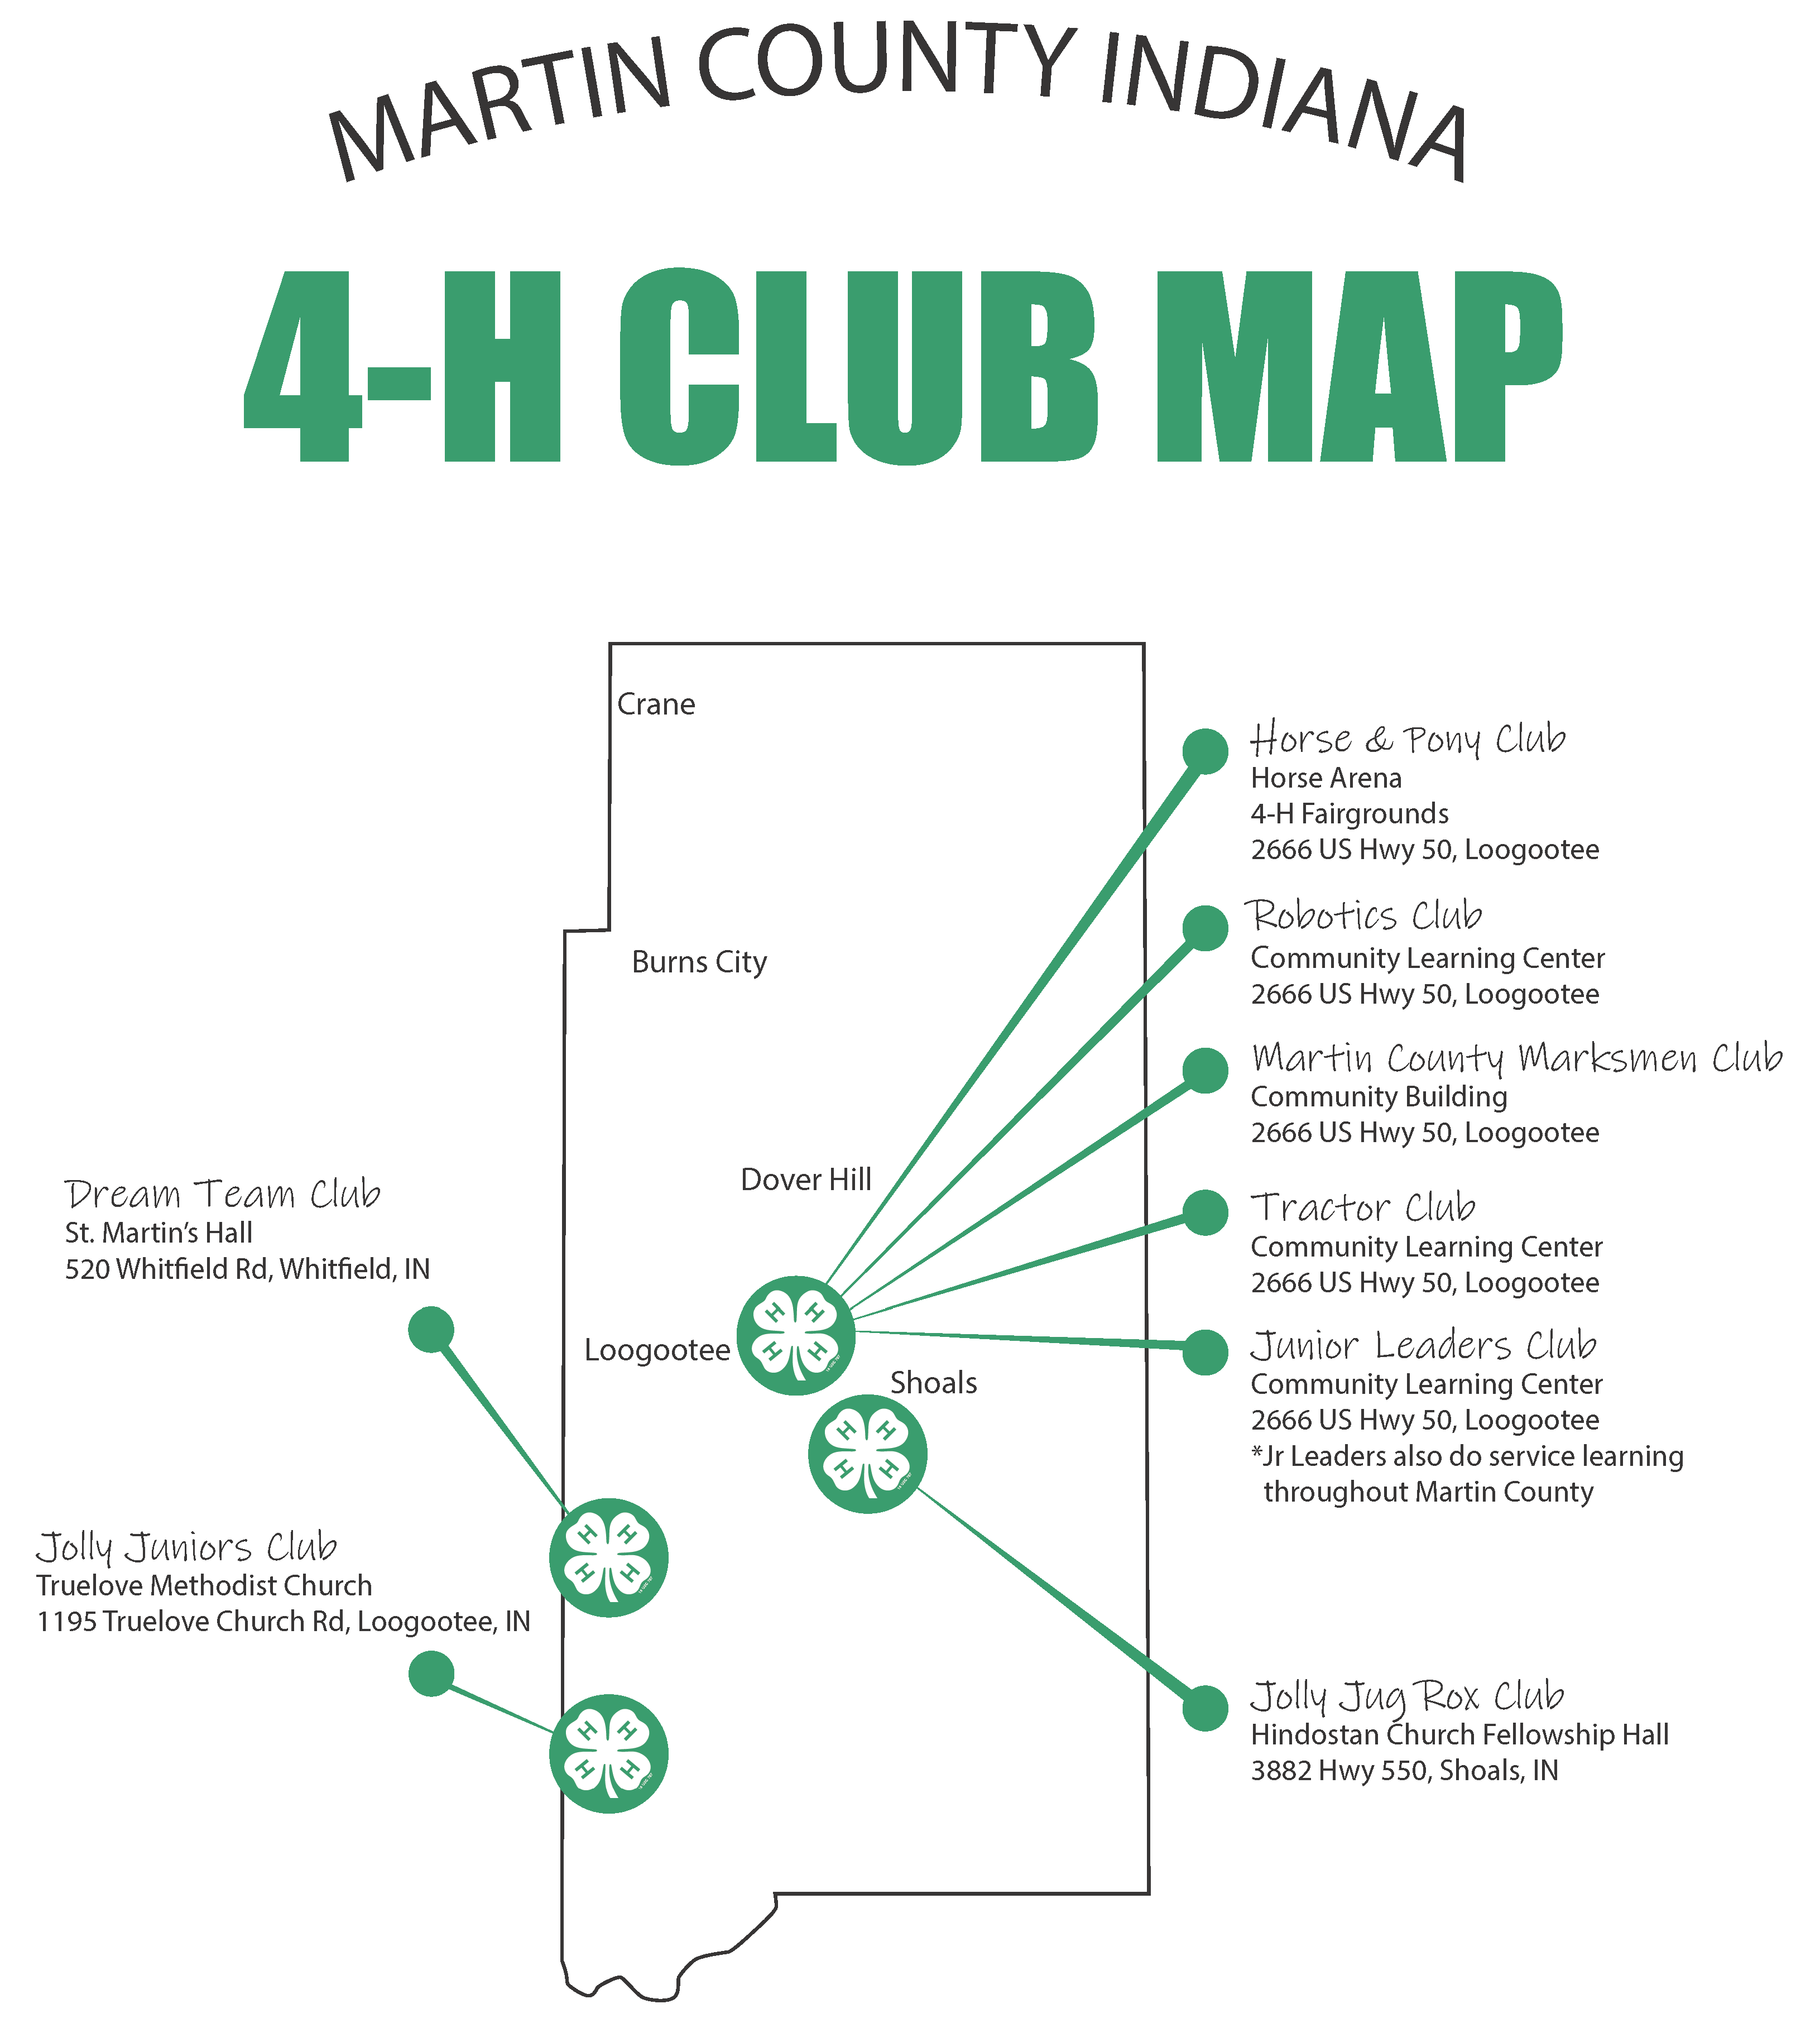 Map of Martin County, Indiana 4-H Club Meeting Locations